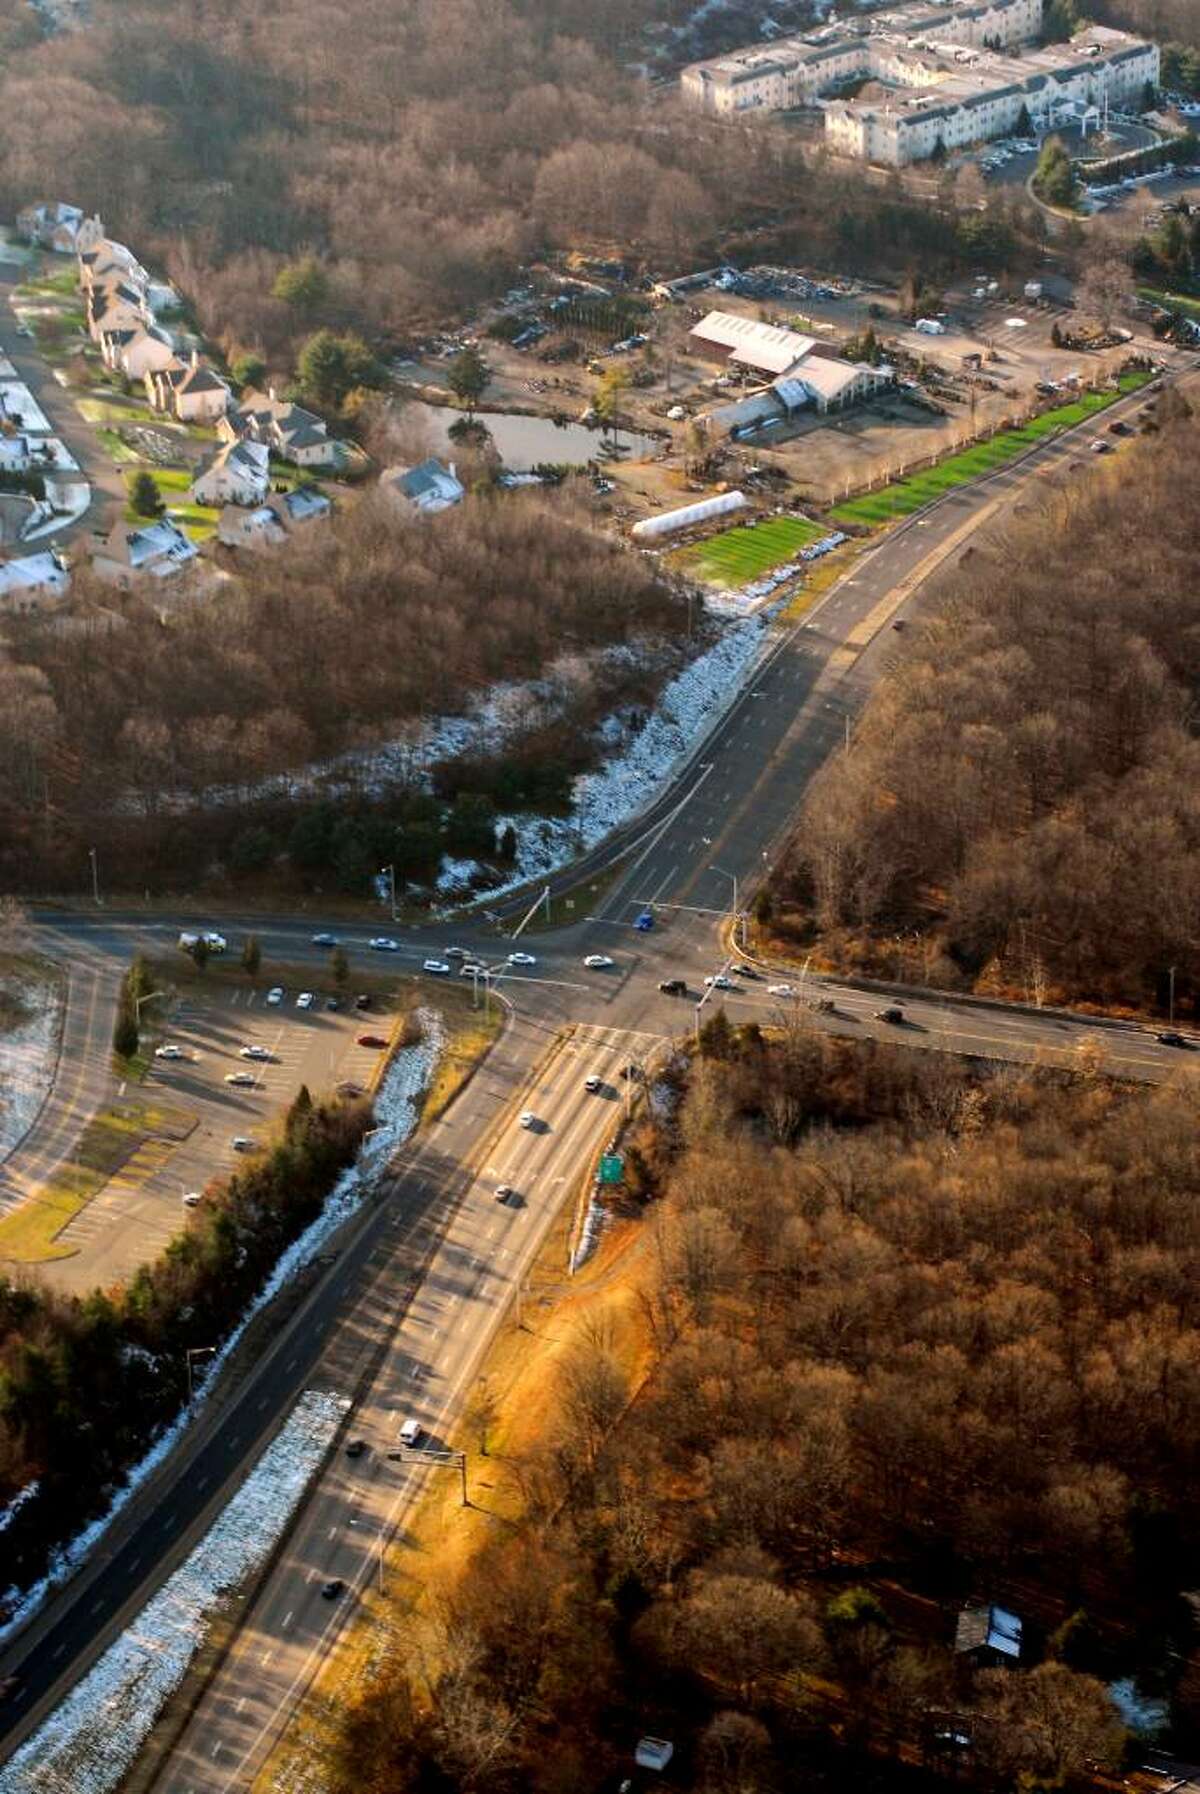 A look at Route 25 expressway where ends abruptly on the Monroe/Trumbull border. Route 25 runs from Bridgeport to Newtown, a long connection for I-95 and I-84. Aerial photo by Morgan Kaolian/AEROPIX